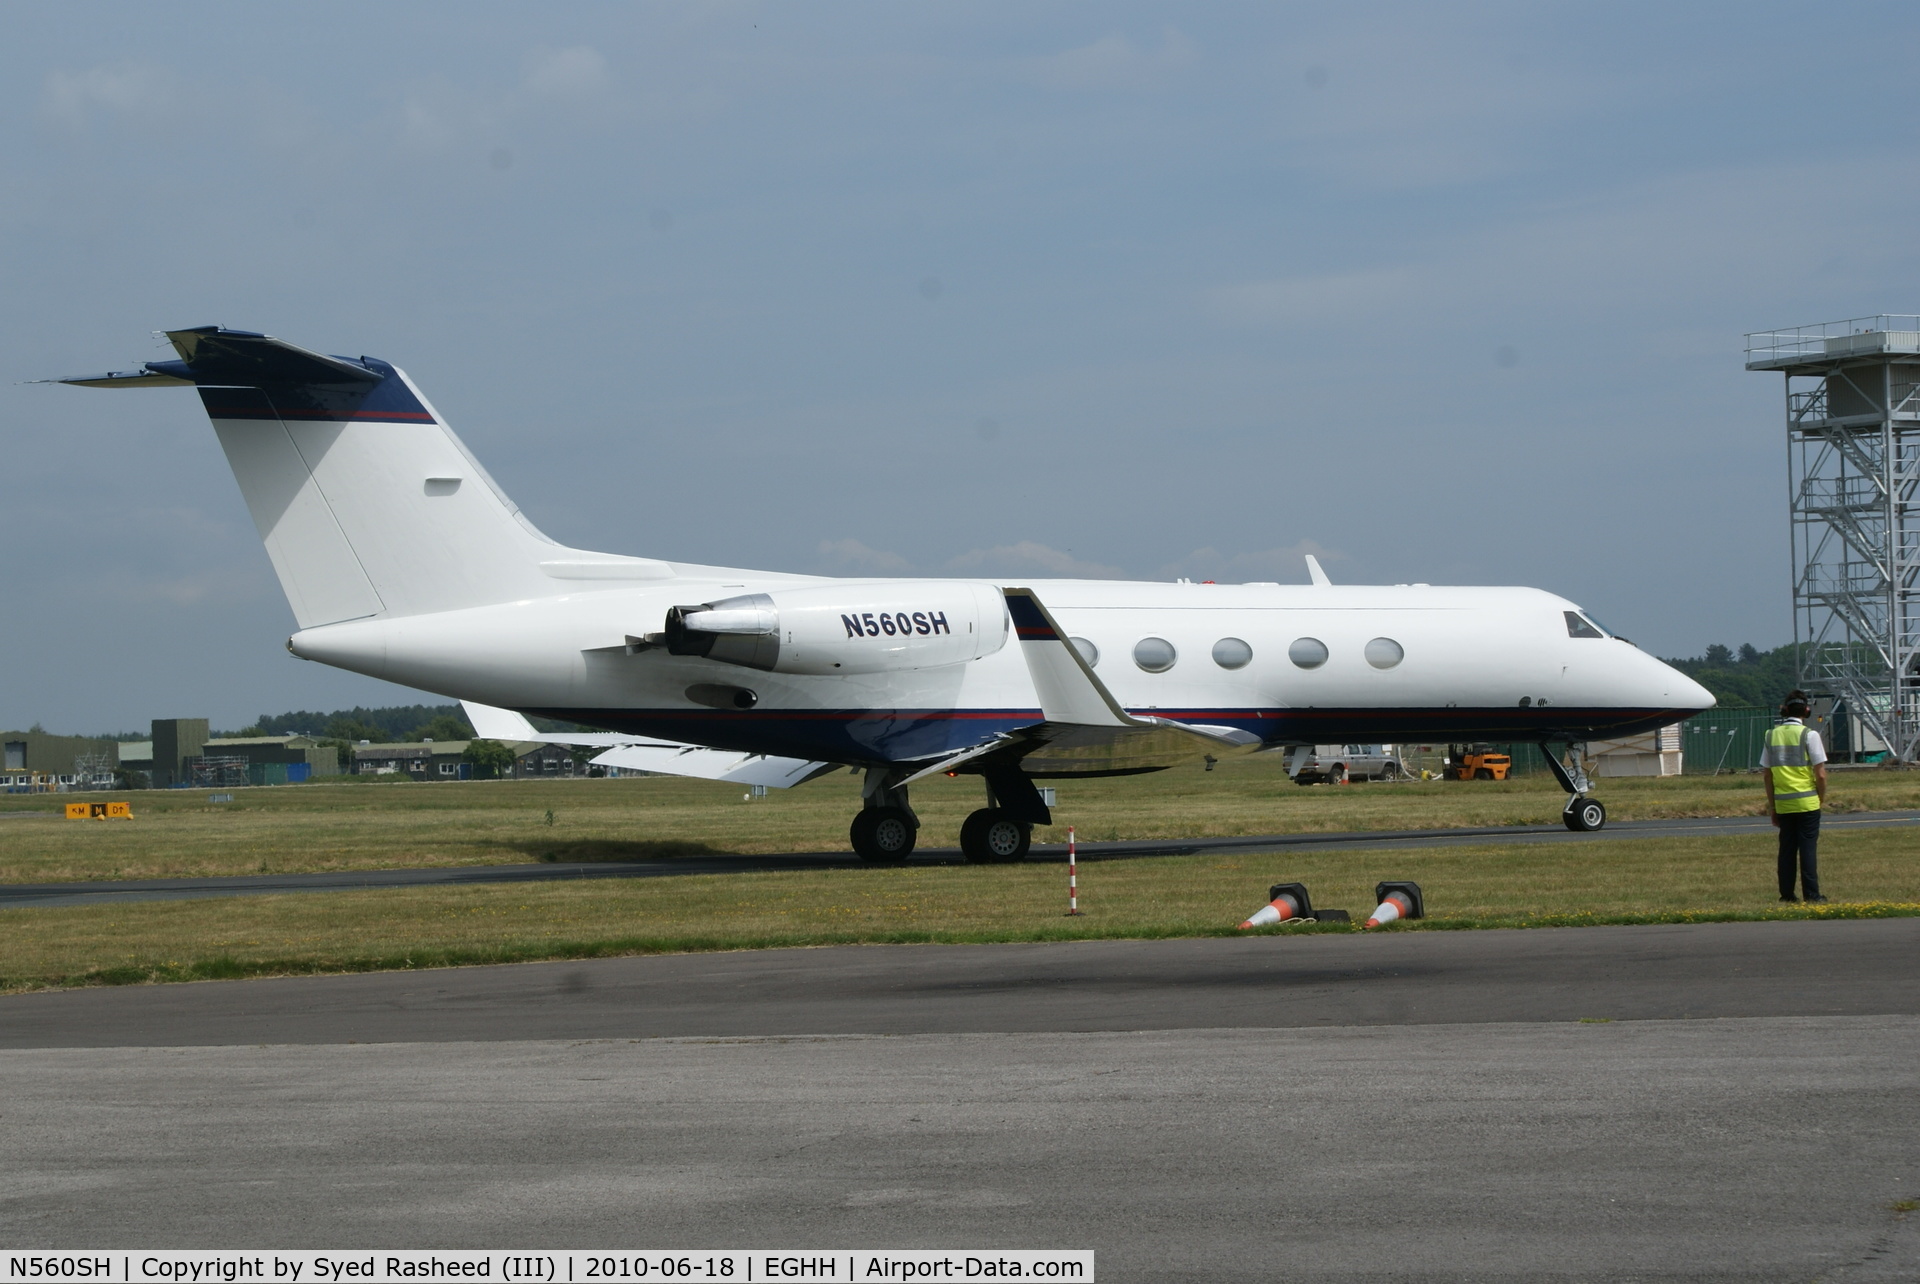 N560SH, 1983 Gulfstream Aerospace G-1159A Gulfstream III C/N 404, Taxing out for departure to Ireland